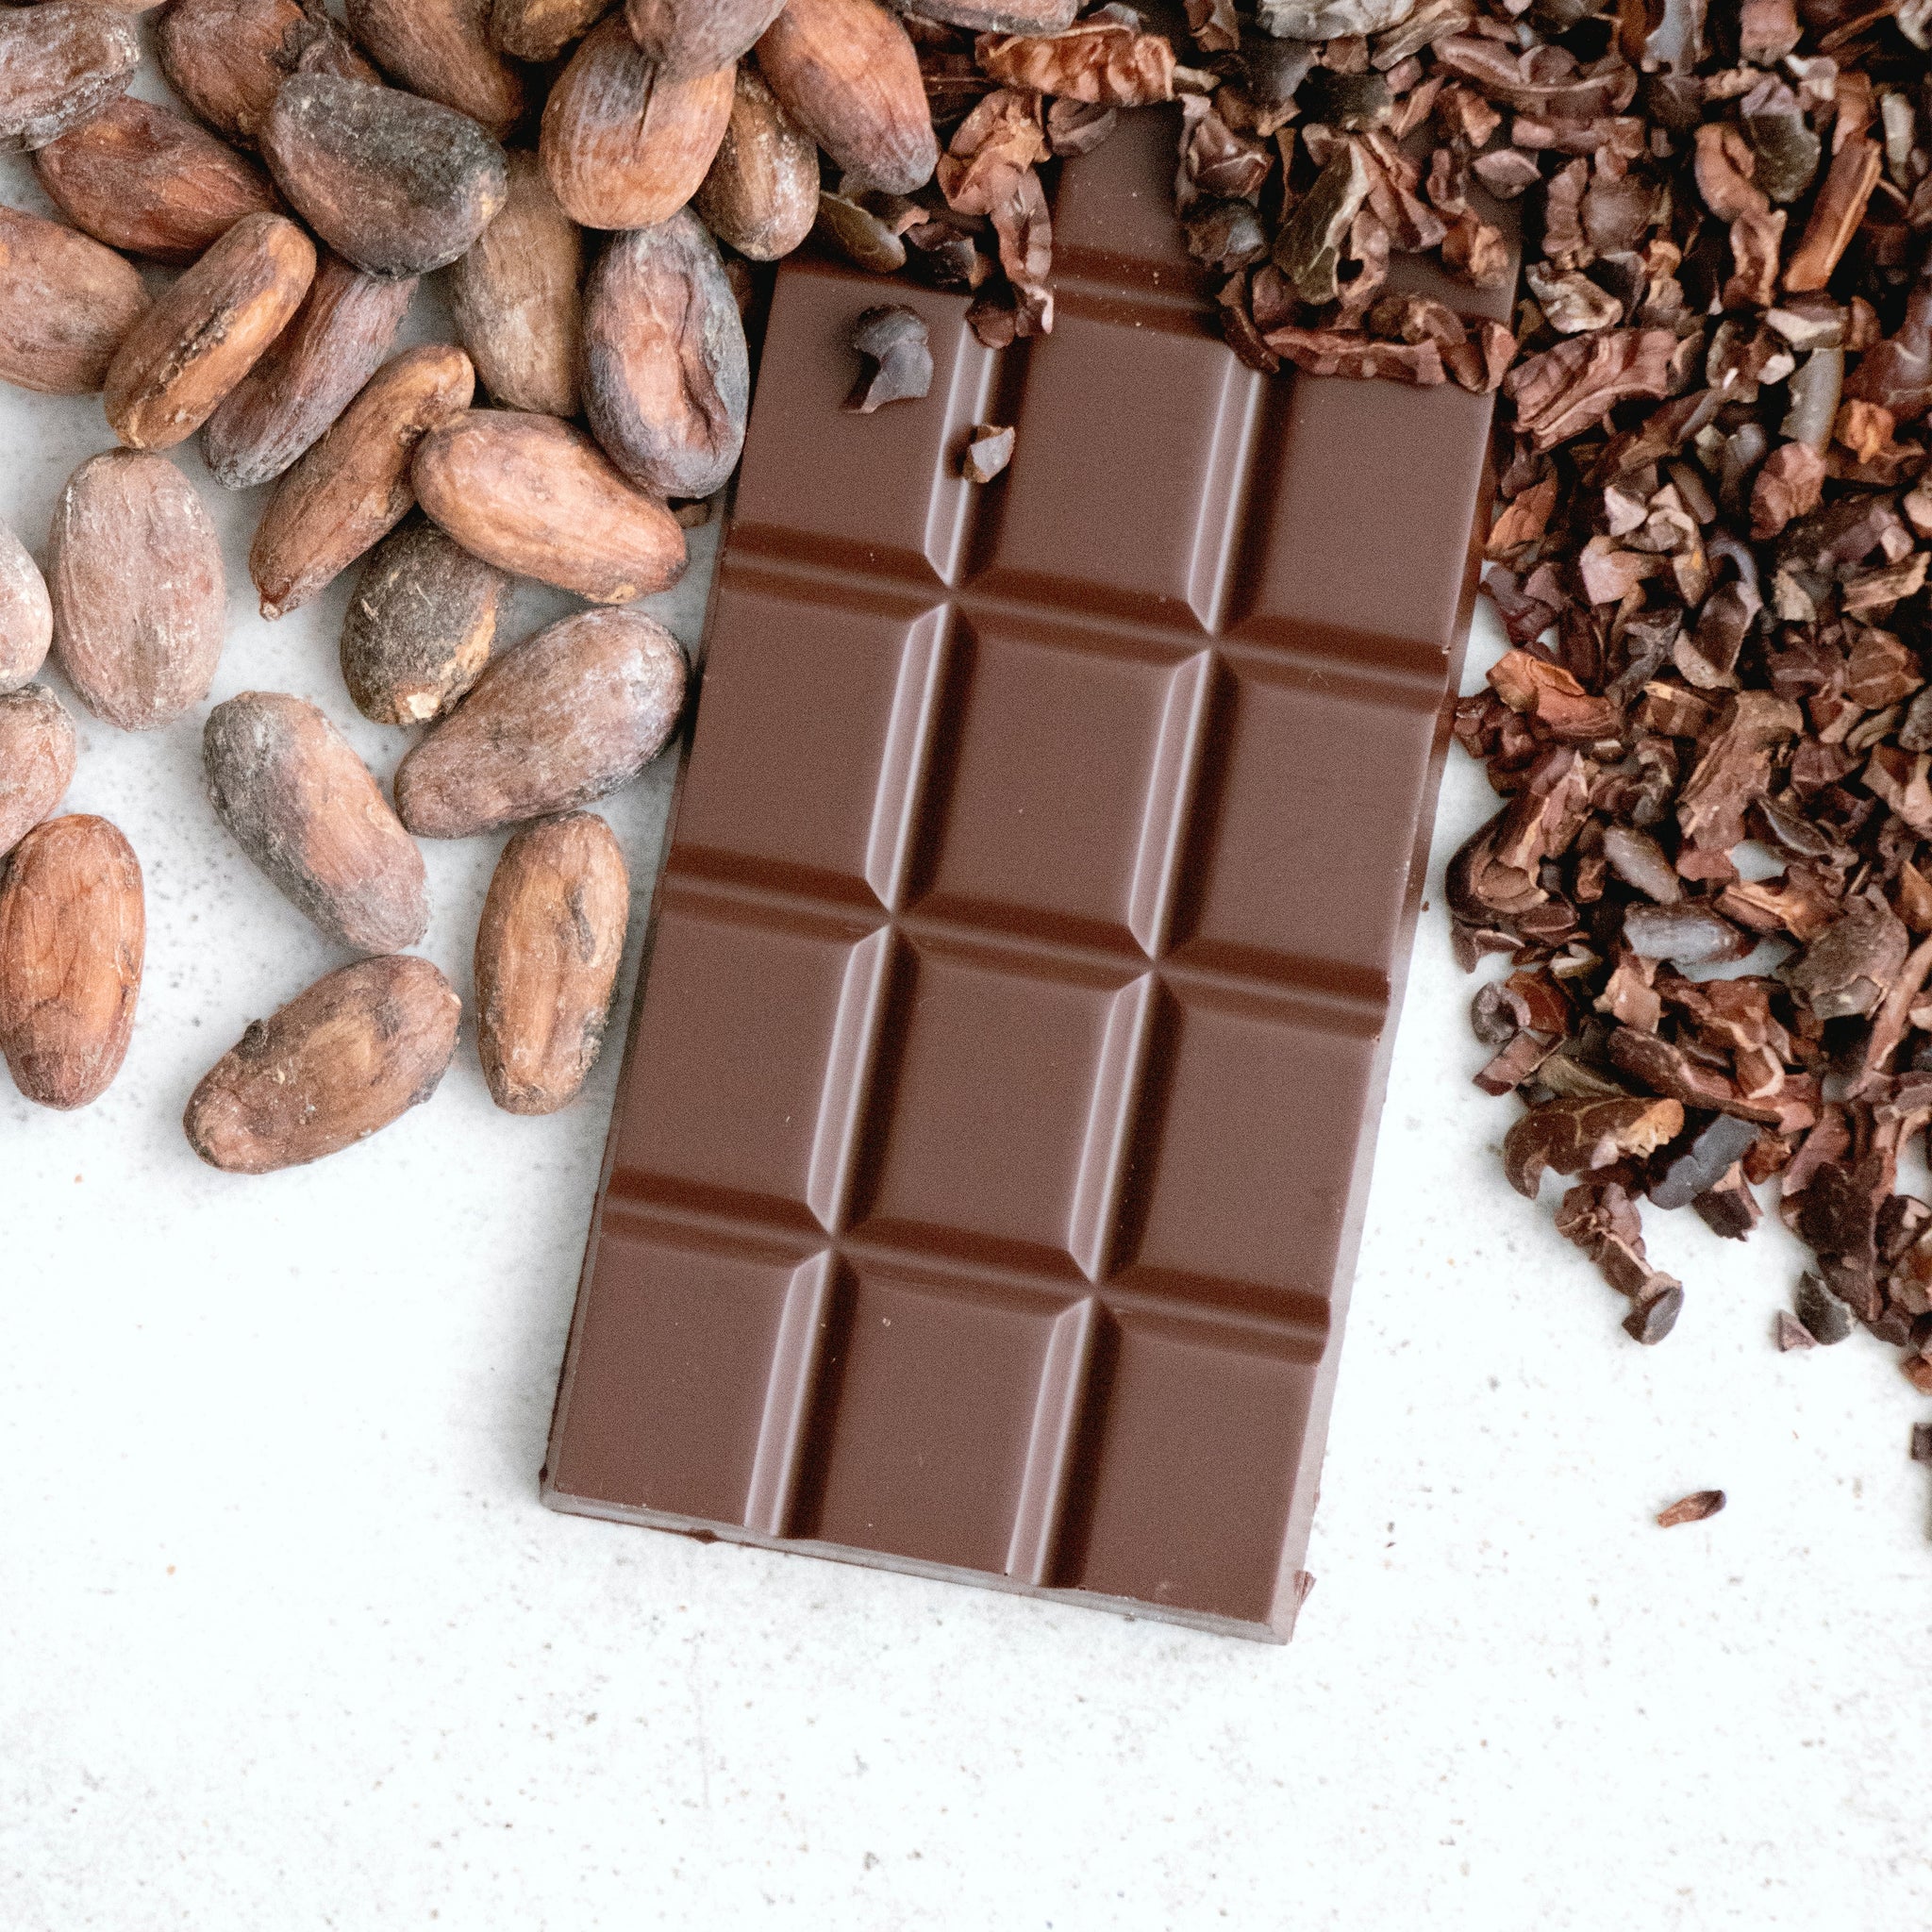 Cacao vs. Cocoa: What Sets Them Apart